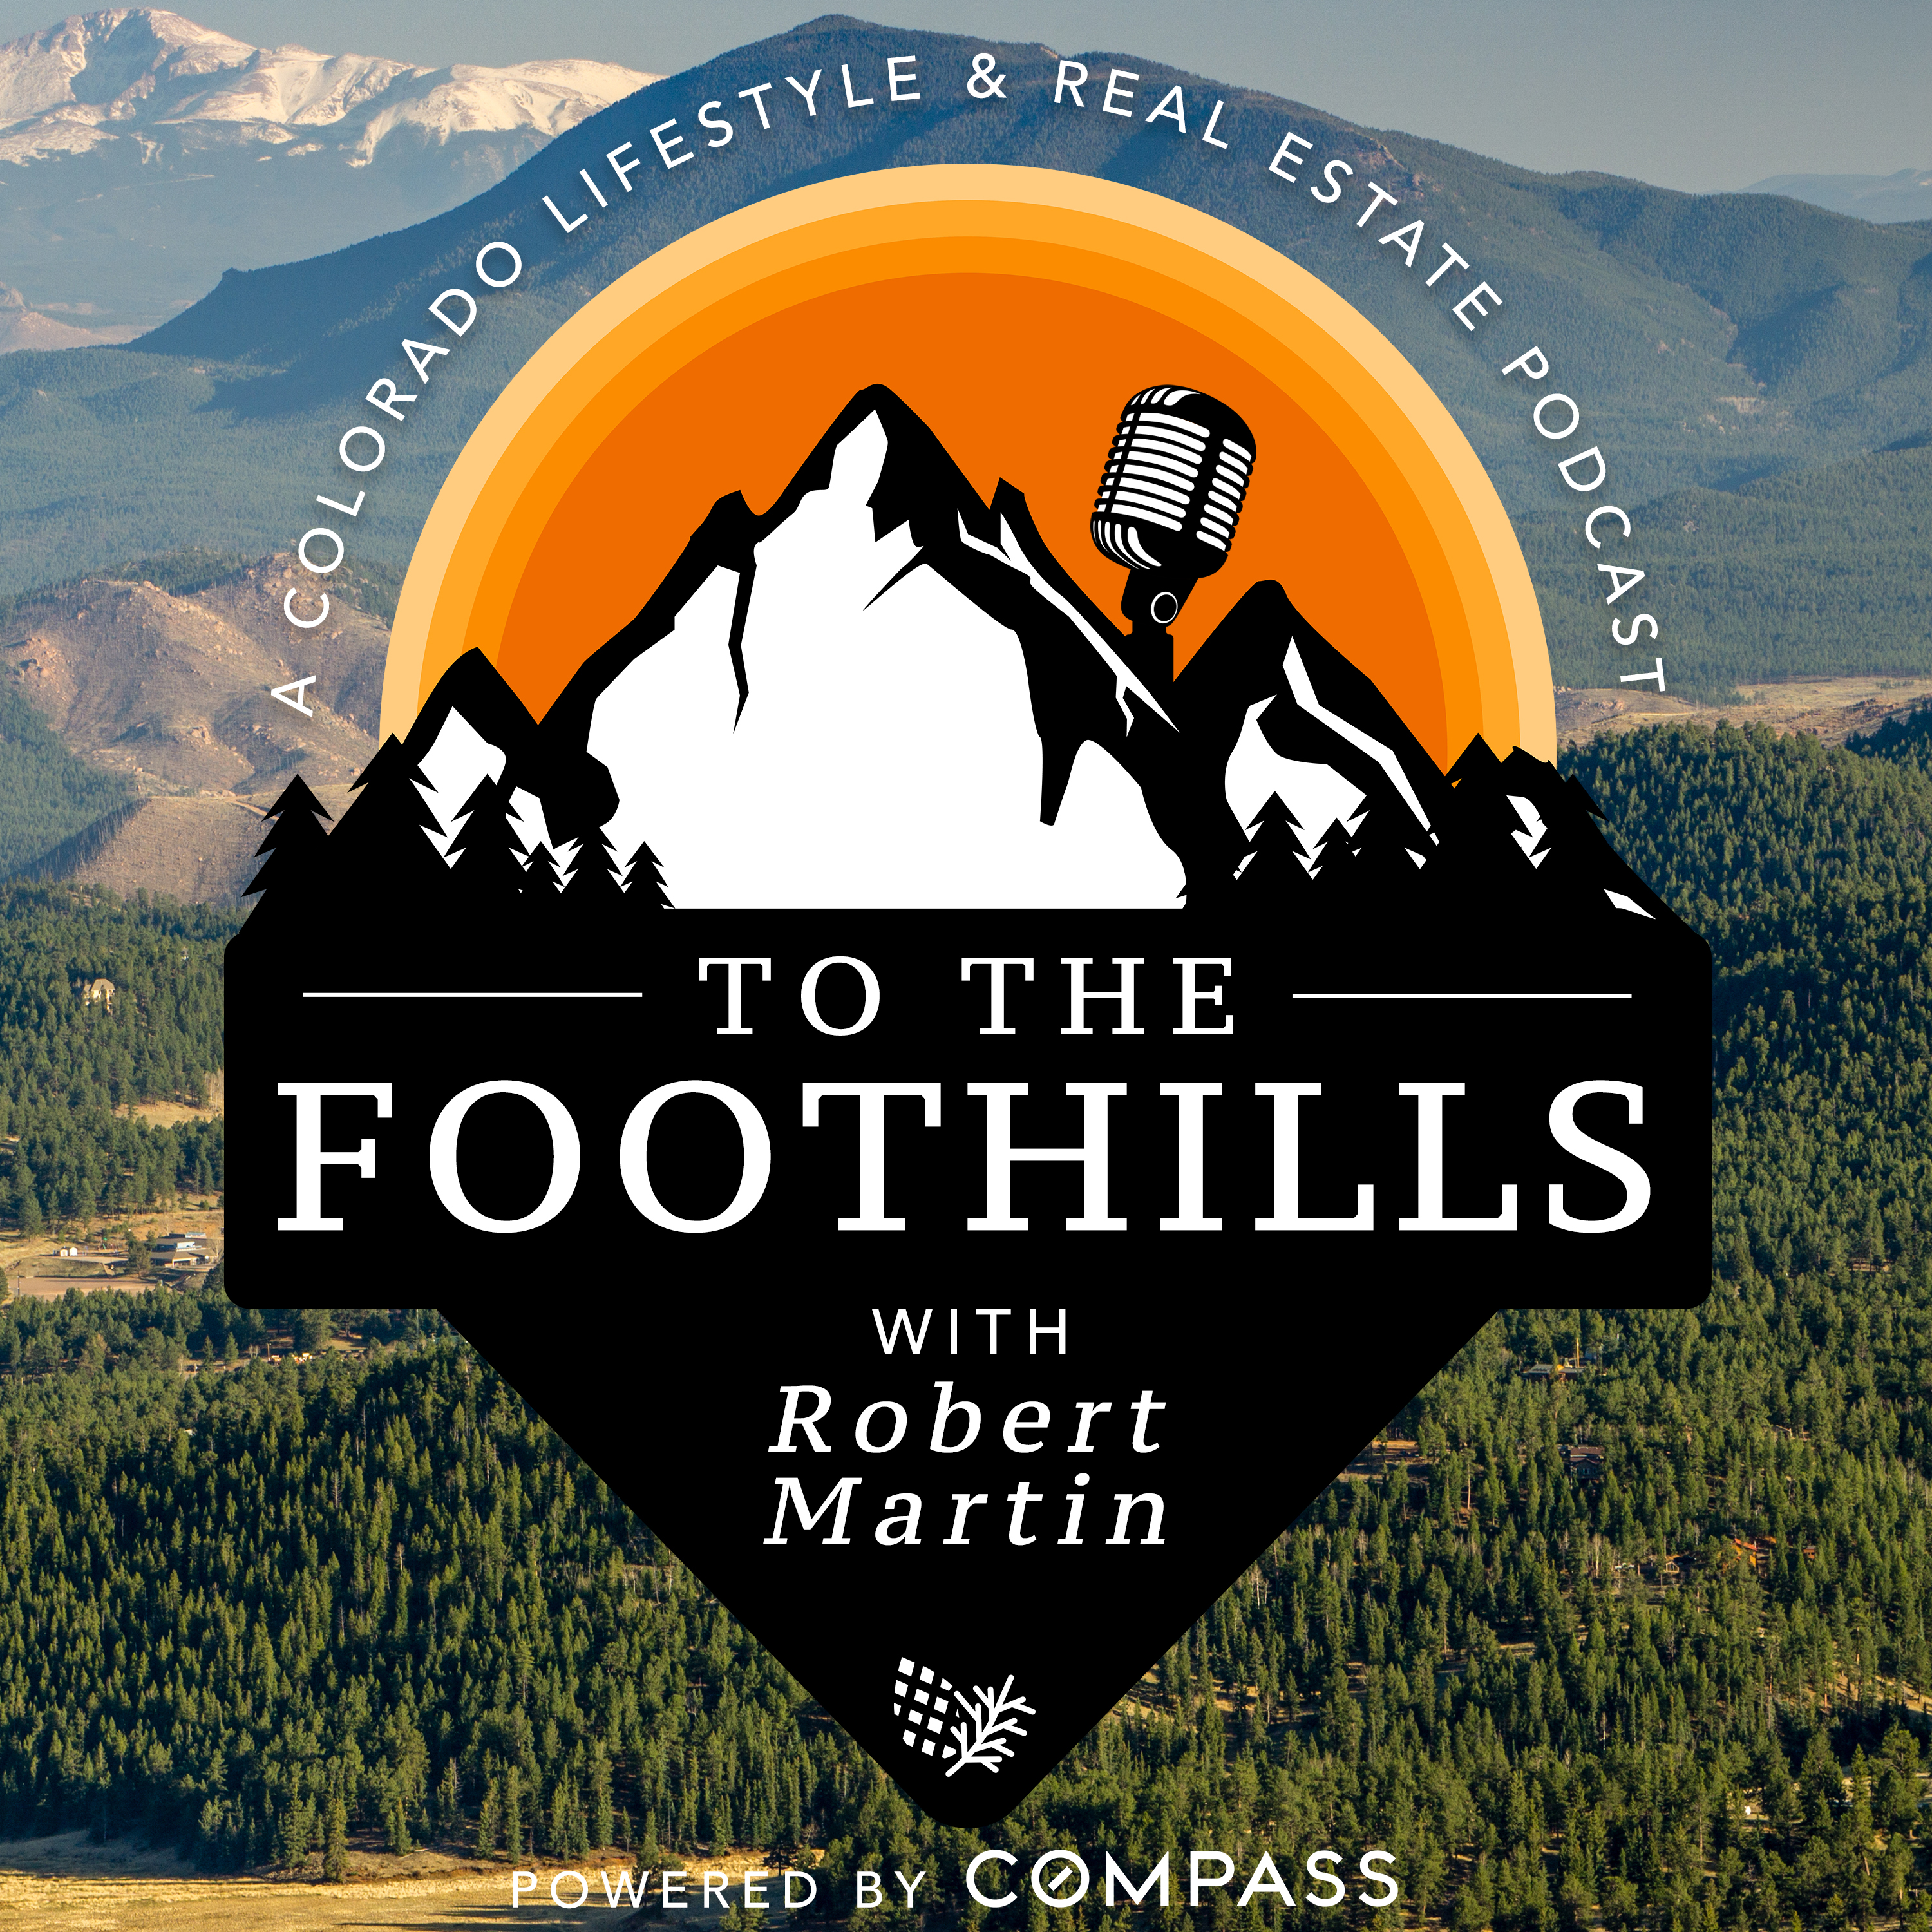 To the Foothills